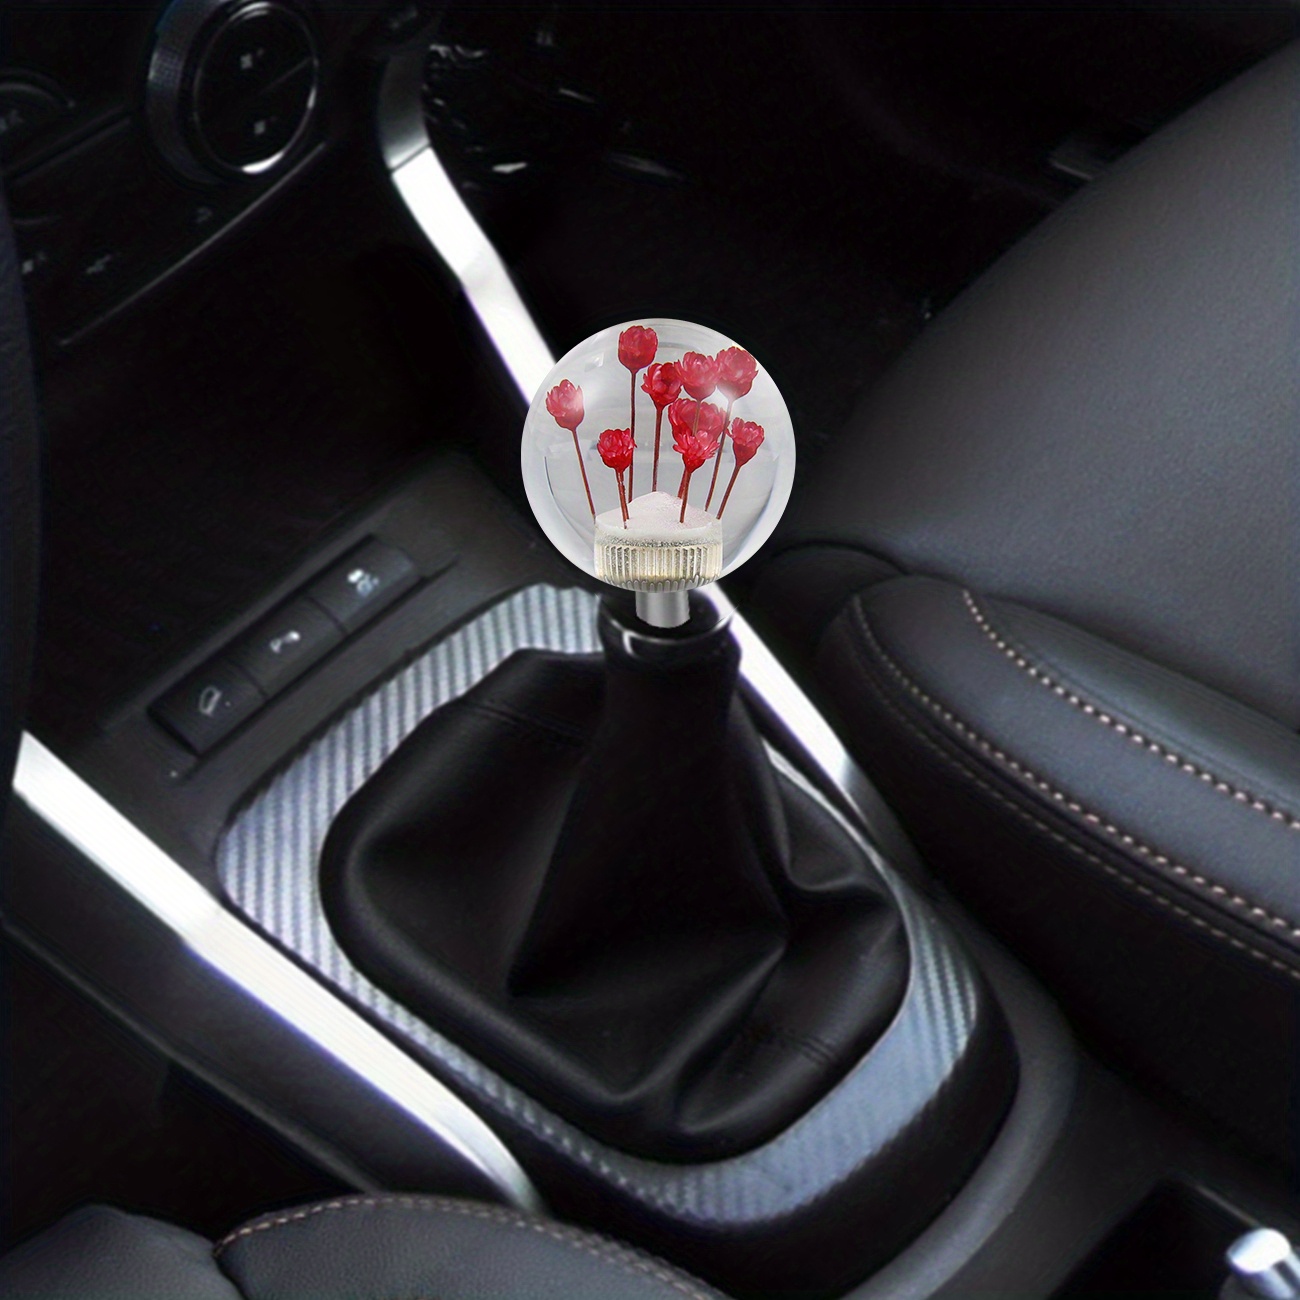 Bashineng Ball Shift Knob Gear Stick Round Shifter Handle Transmissions  Shifting Lever Fit Most Manual Automatic Cars Truck SUV Vehicle（Gold）